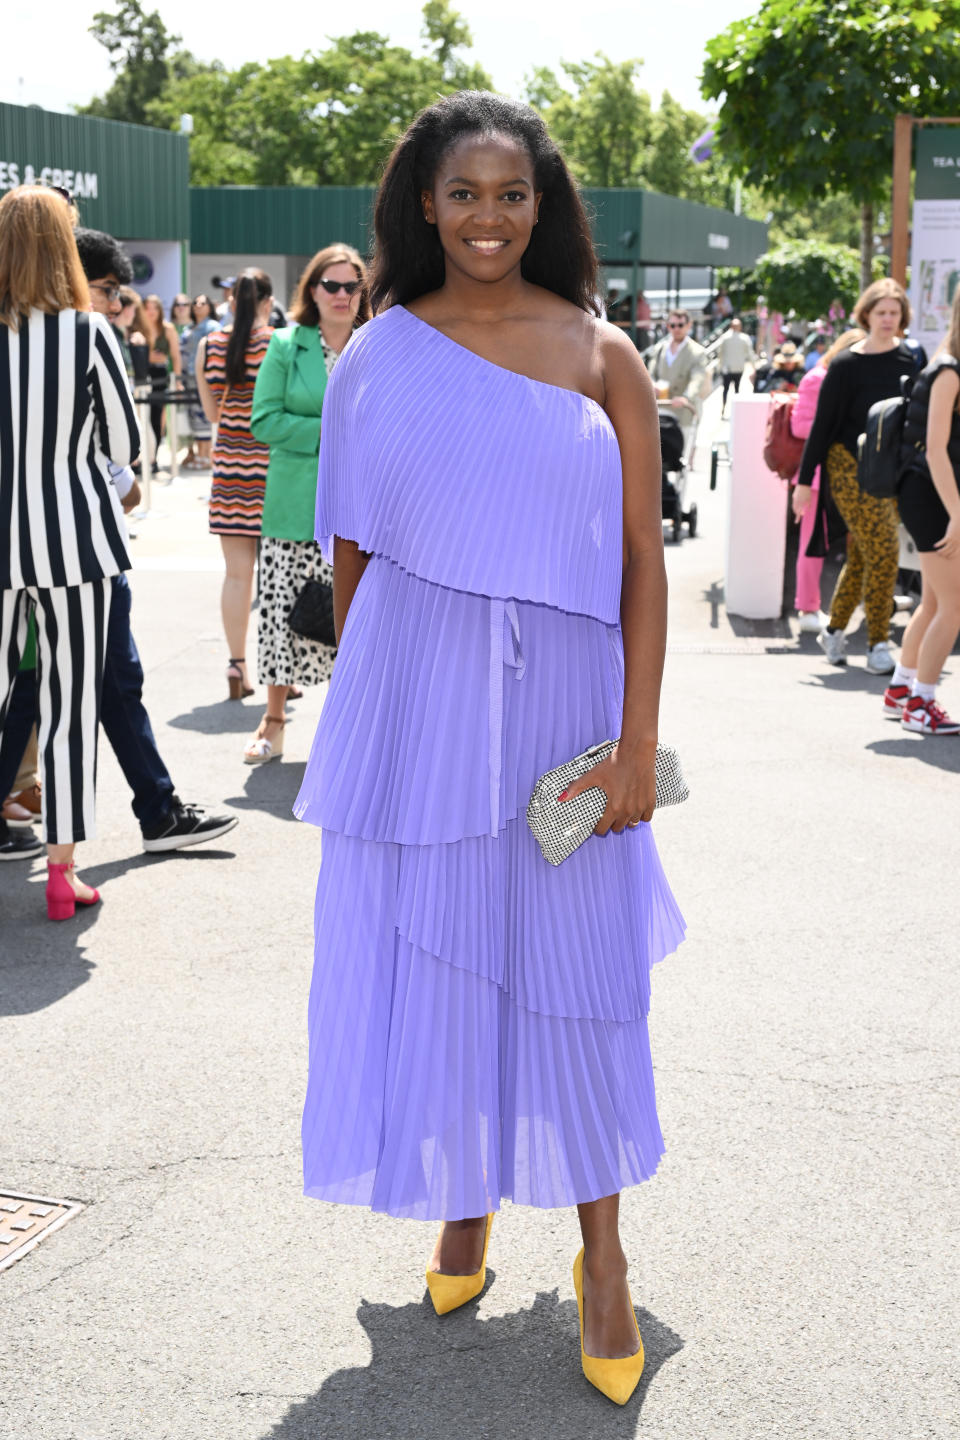 LONDON, ENGLAND - JULY 03: Oti Mabuse attends day one of the Wimbledon Tennis Championships at the All England Lawn Tennis and Croquet Club on July 03, 2023 in London, England. (Photo by Karwai Tang/WireImage)